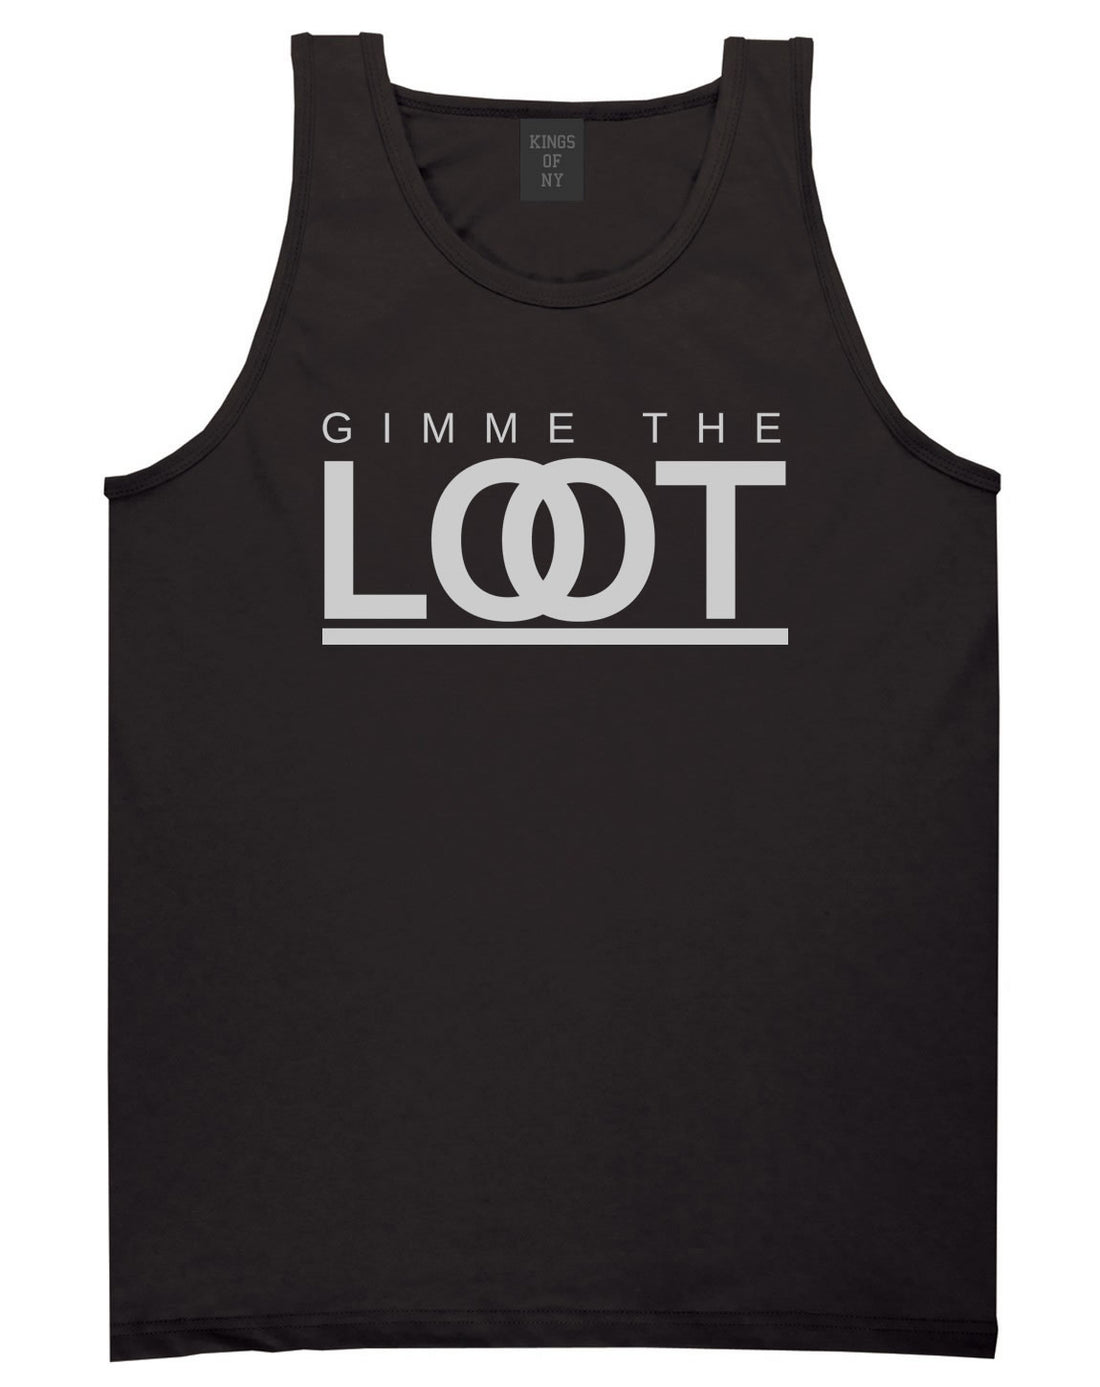 Gimme The Loot  Tank Top in Black By Kings Of NY